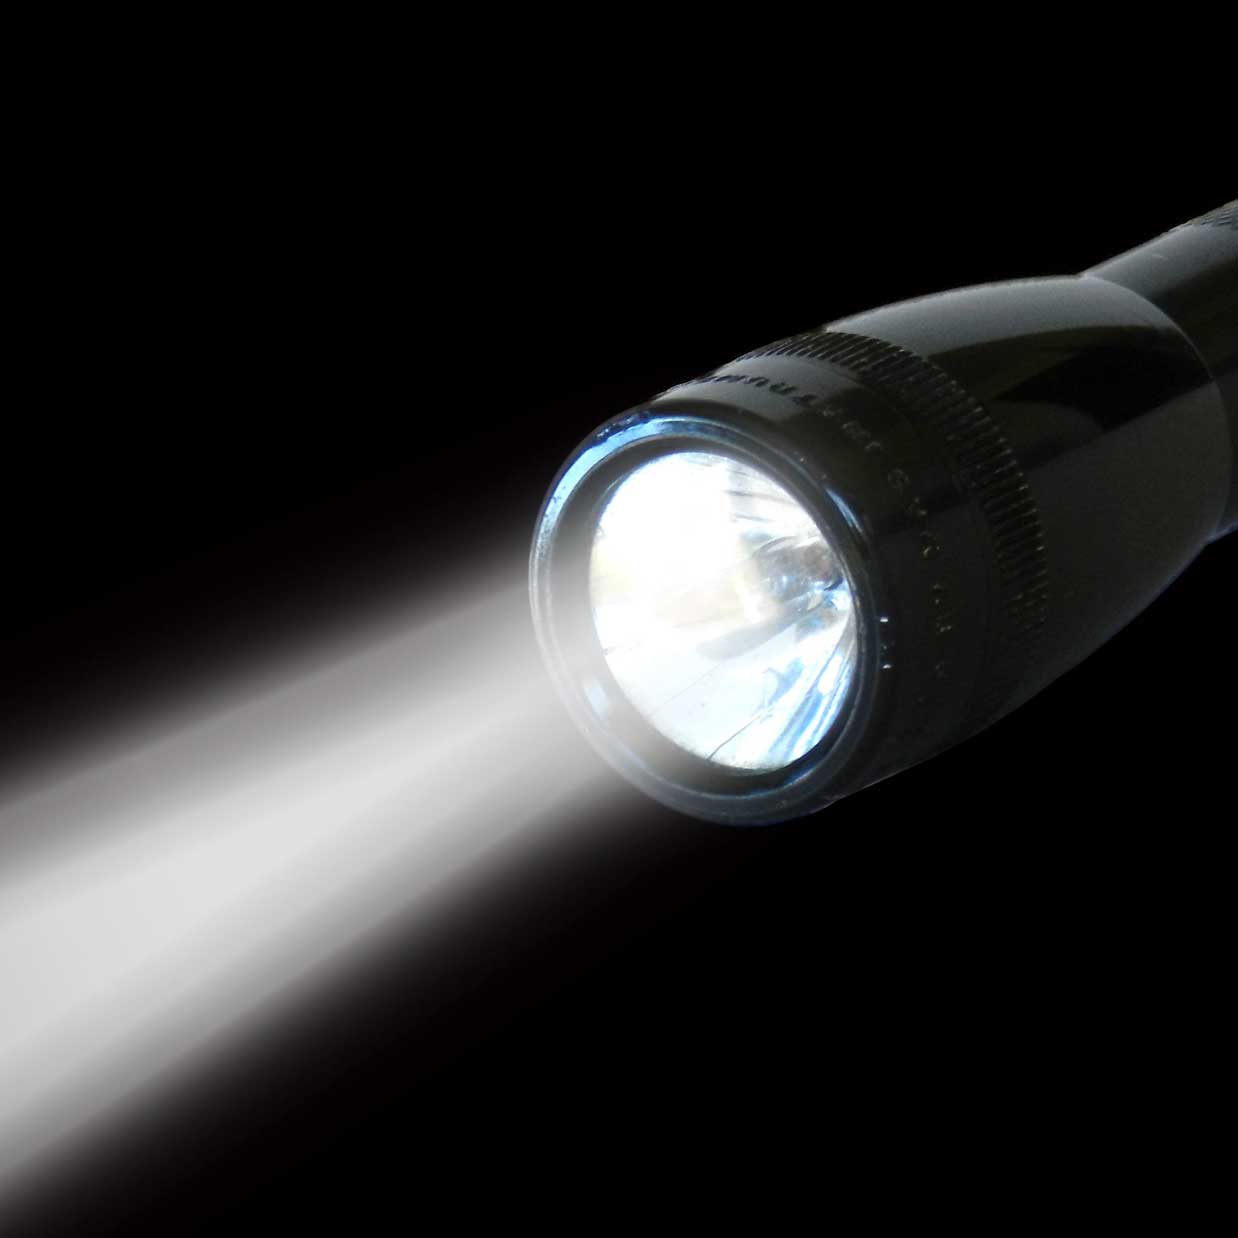 Picture of a flashlight